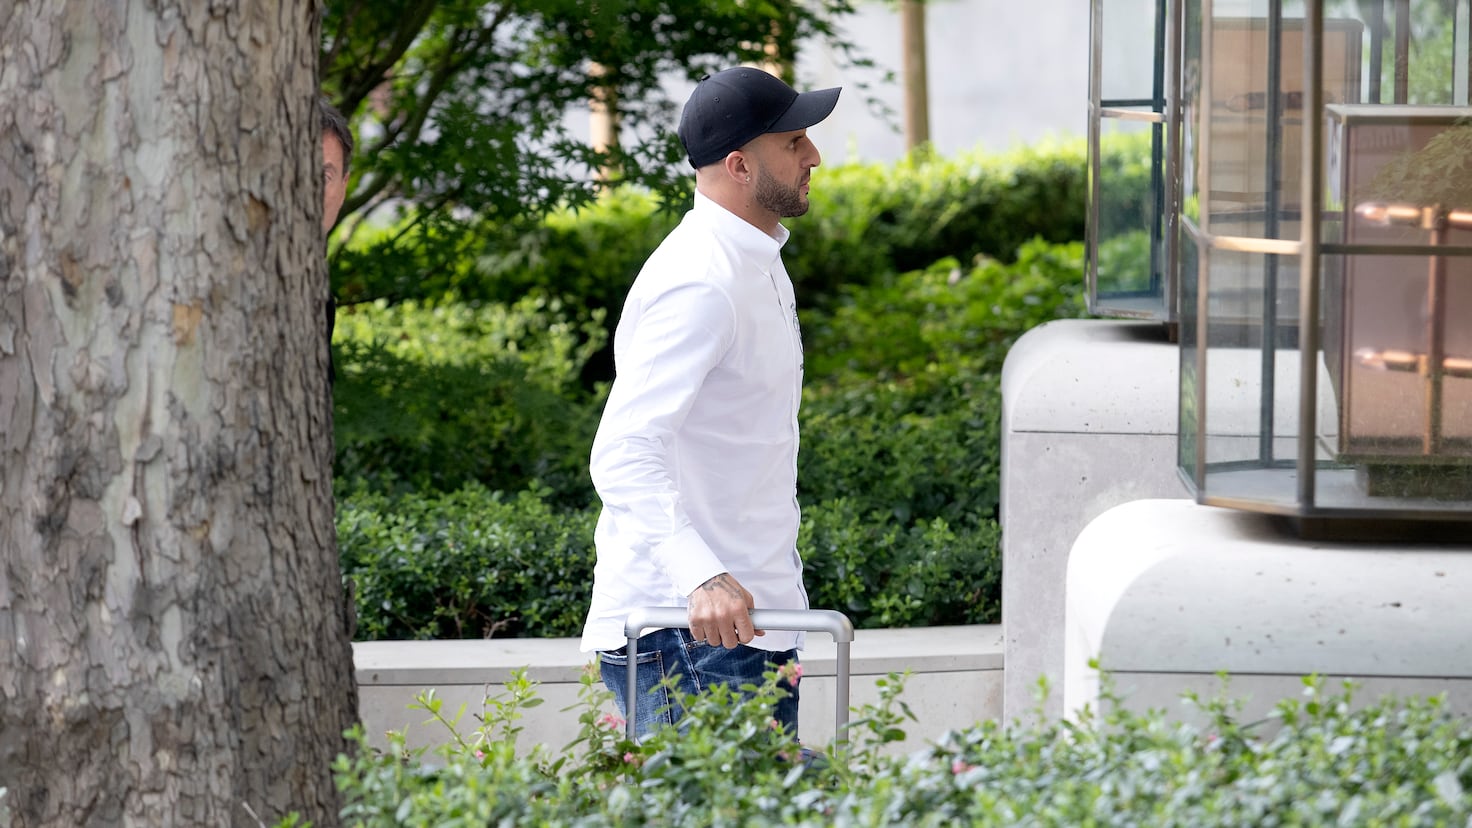 Manchester City star Kyle Walker returns home after his double life comes to light
